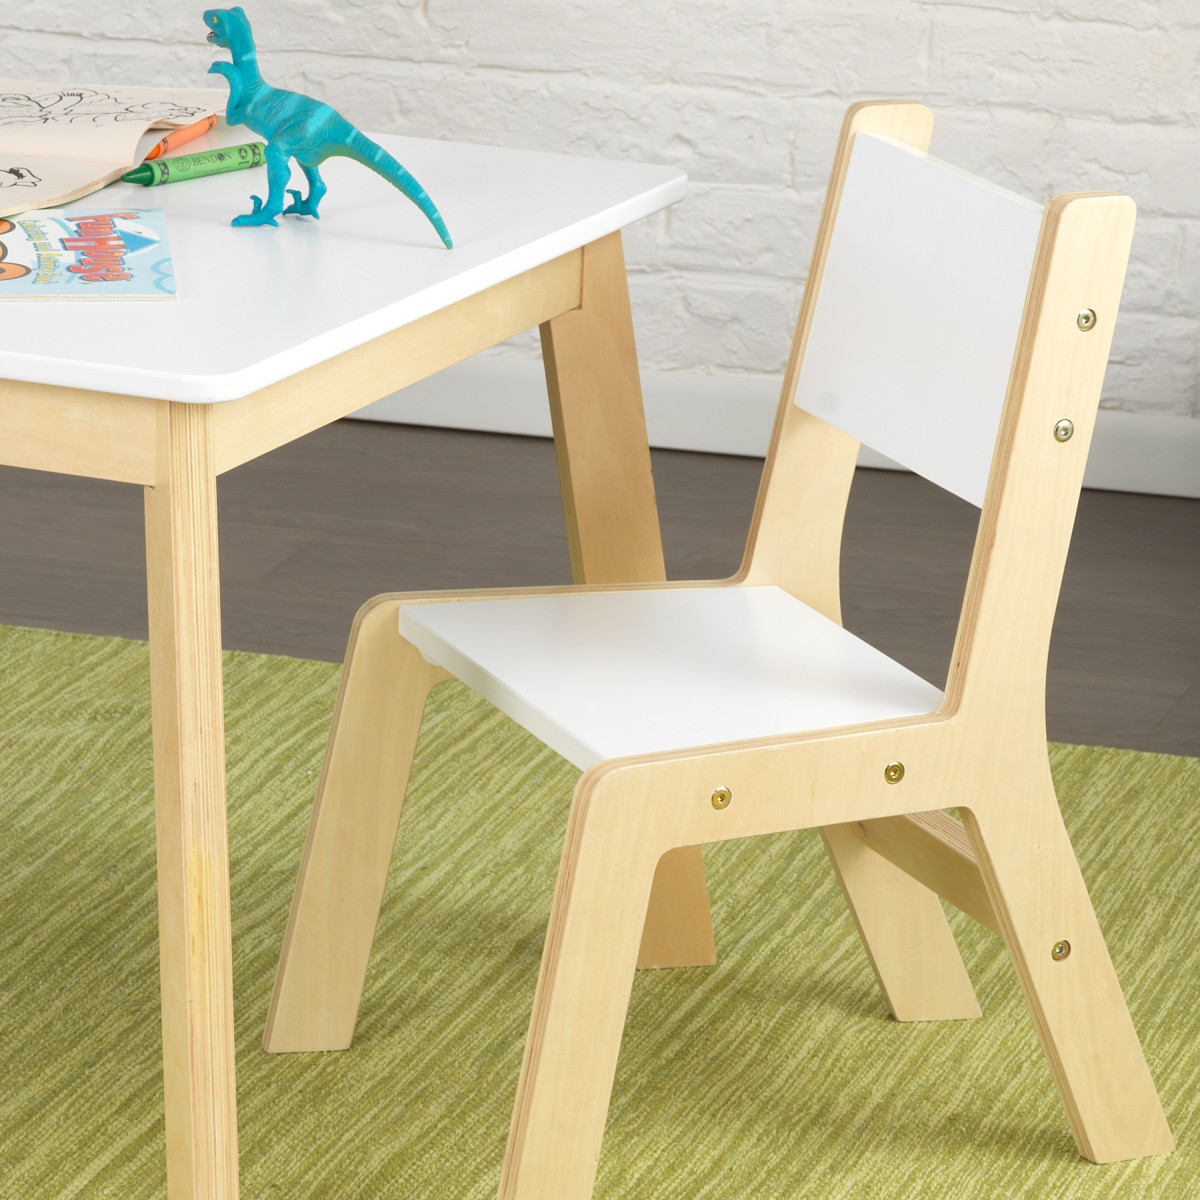 Kidkraft Modern Table And 2 Chairs Set 27025 Pirum Wooden Toys